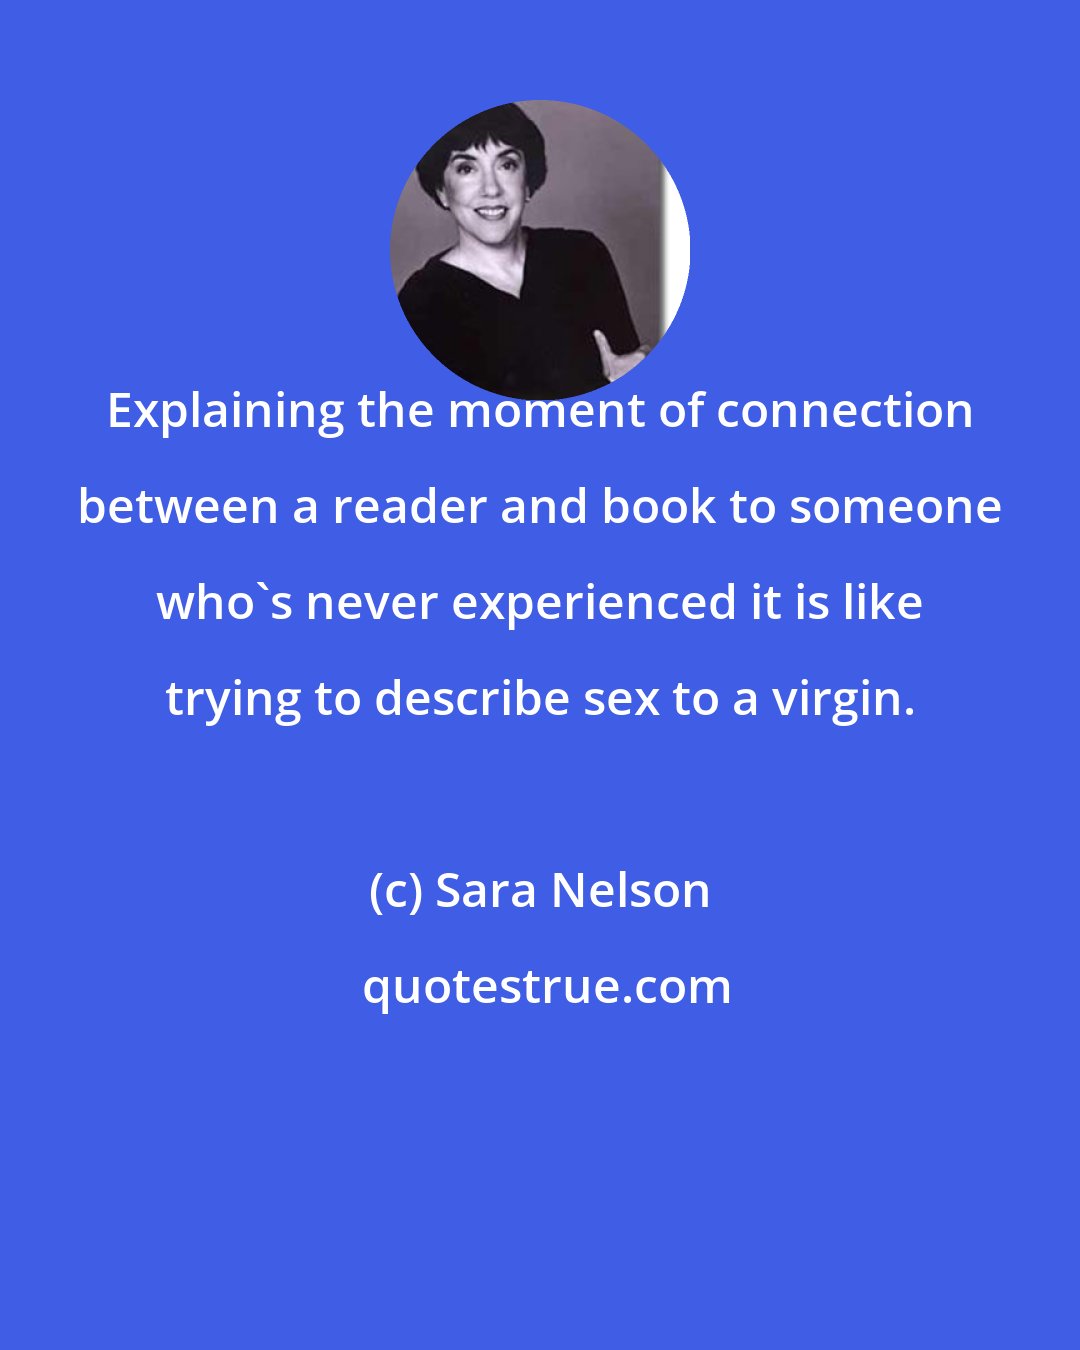 Sara Nelson: Explaining the moment of connection between a reader and book to someone who's never experienced it is like trying to describe sex to a virgin.